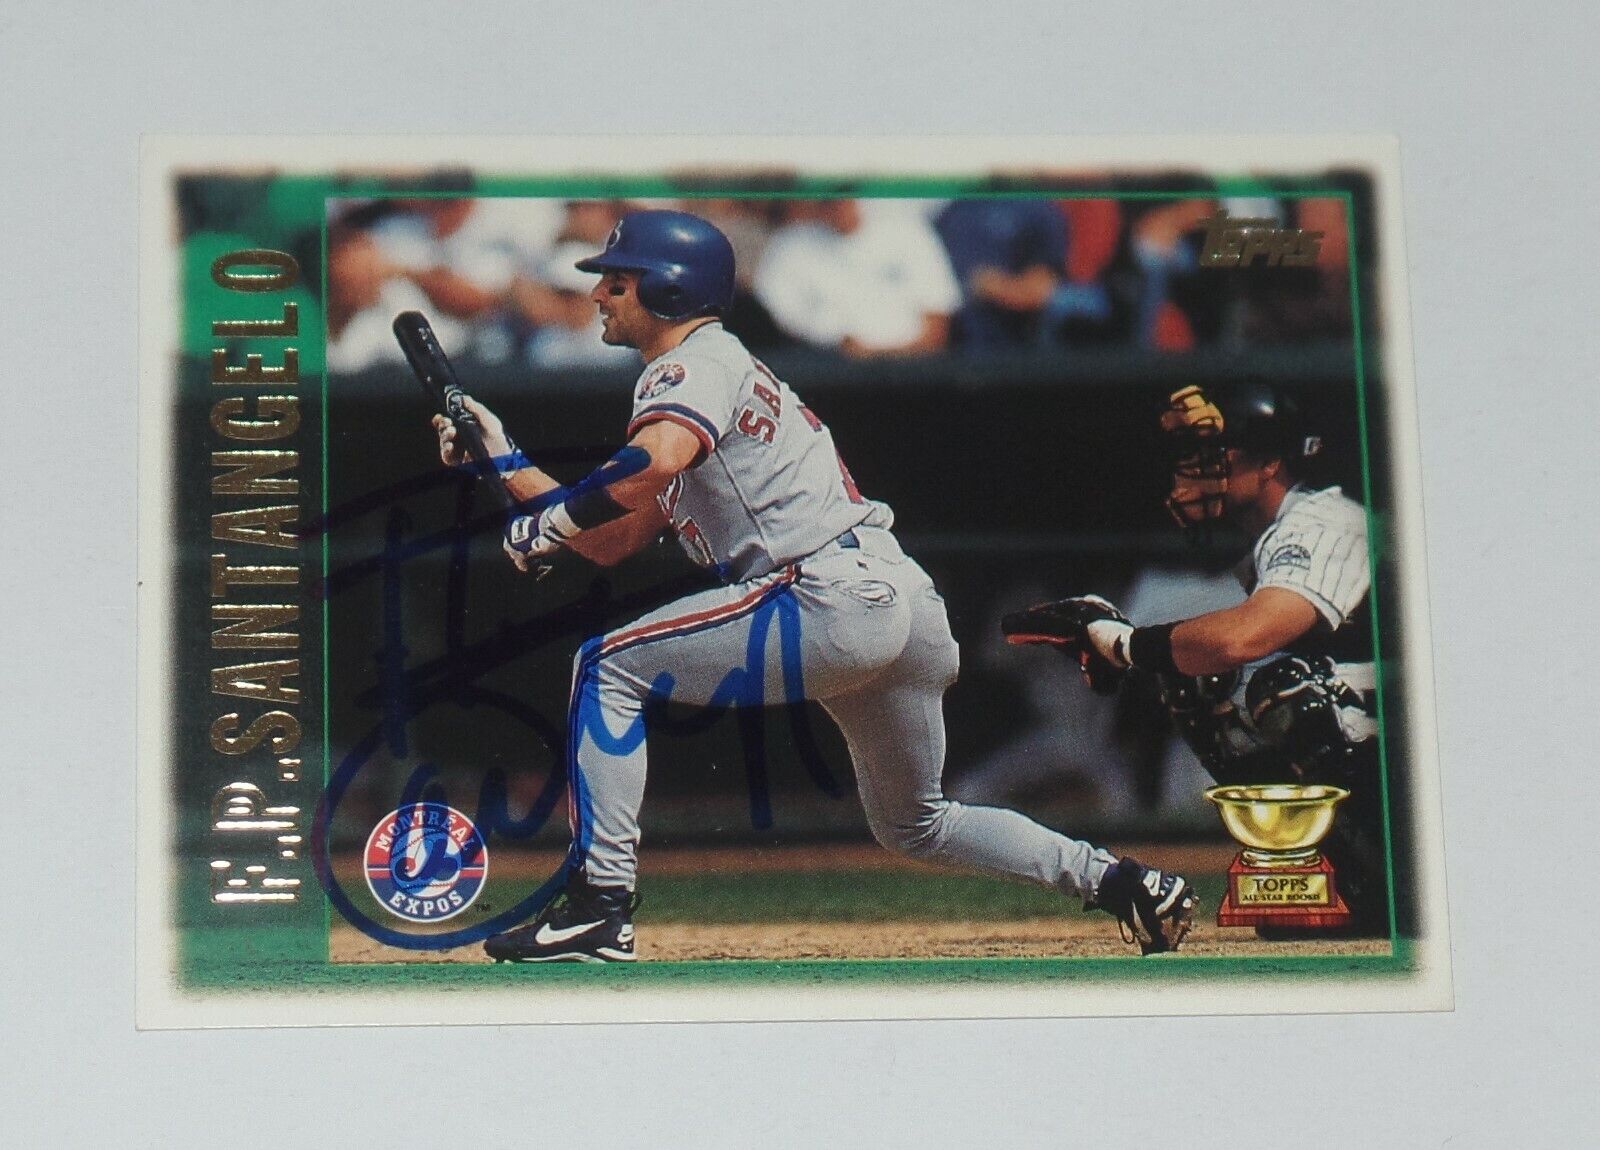 FP F.P. SANTANGELO SIGNED AUTO\'D 1997 TOPPS CARD #17 MONTREAL EXPOS GIANTS